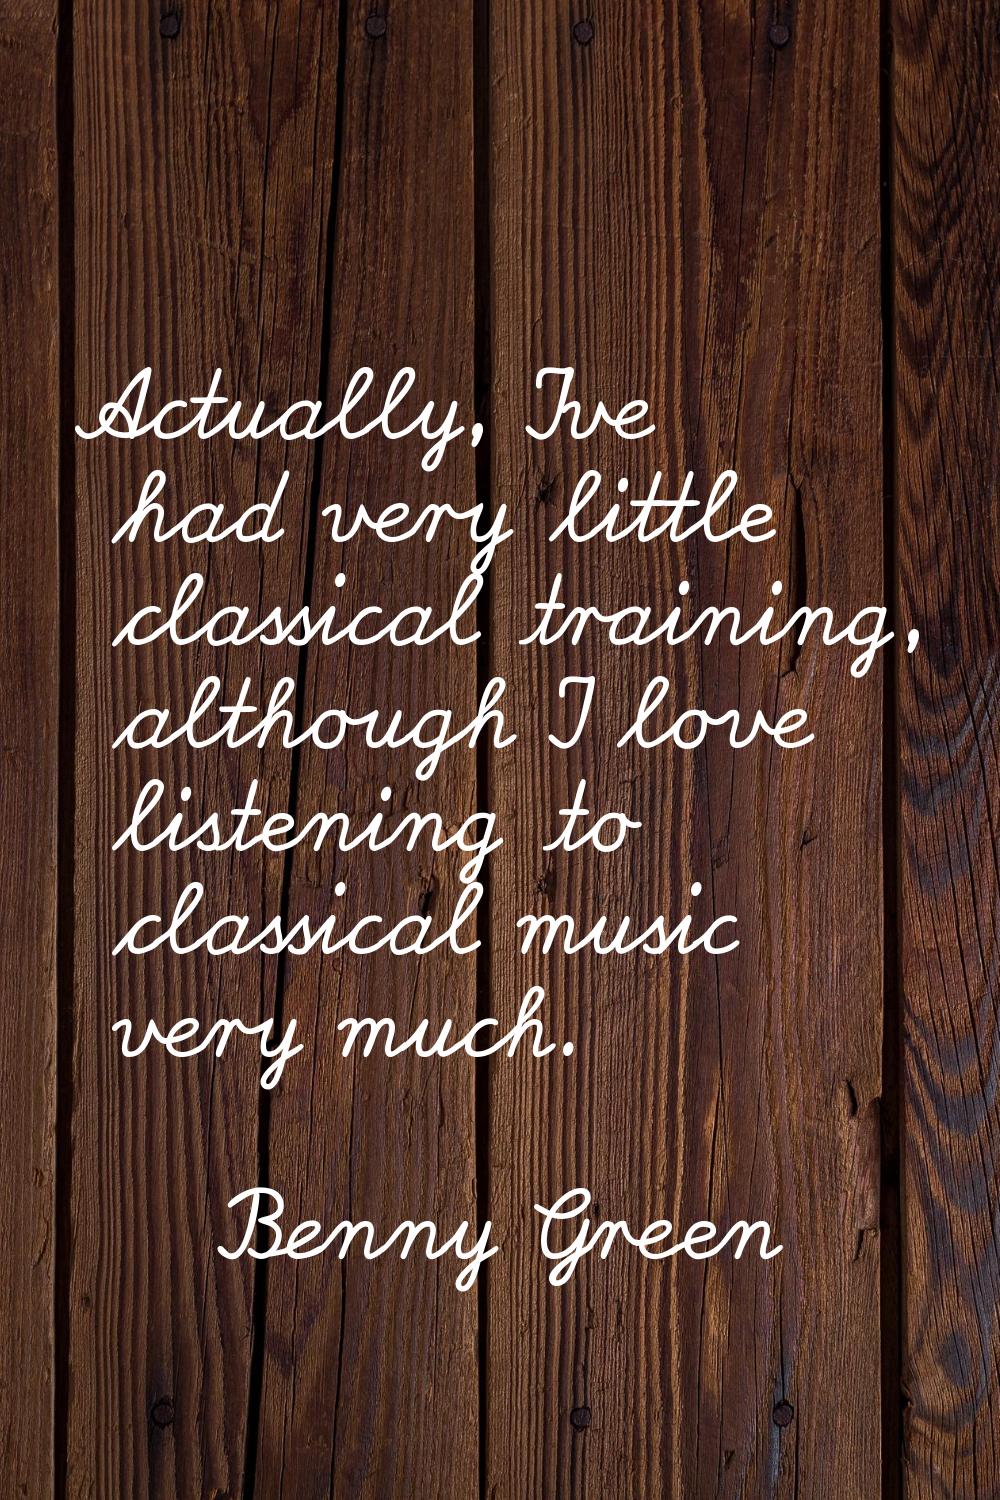 Actually, I've had very little classical training, although I love listening to classical music ver